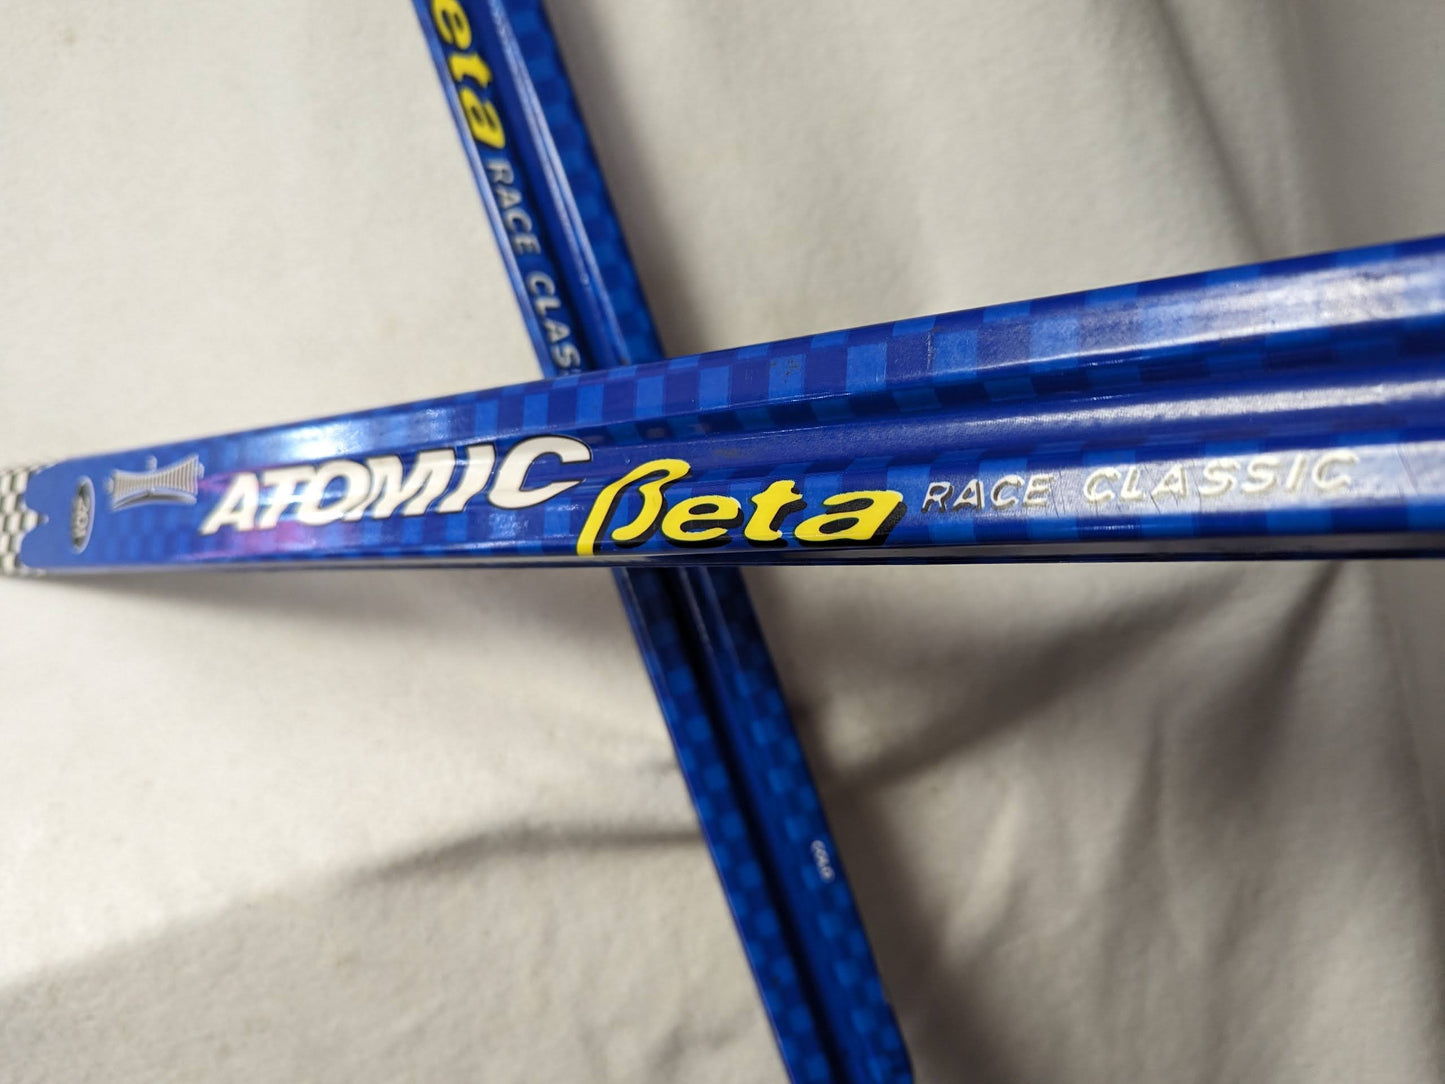 Atomic Beta Race Classic XC - Cross Country Skis w/NNN  Bindings Size 201 Cm Color Blue Condition Used